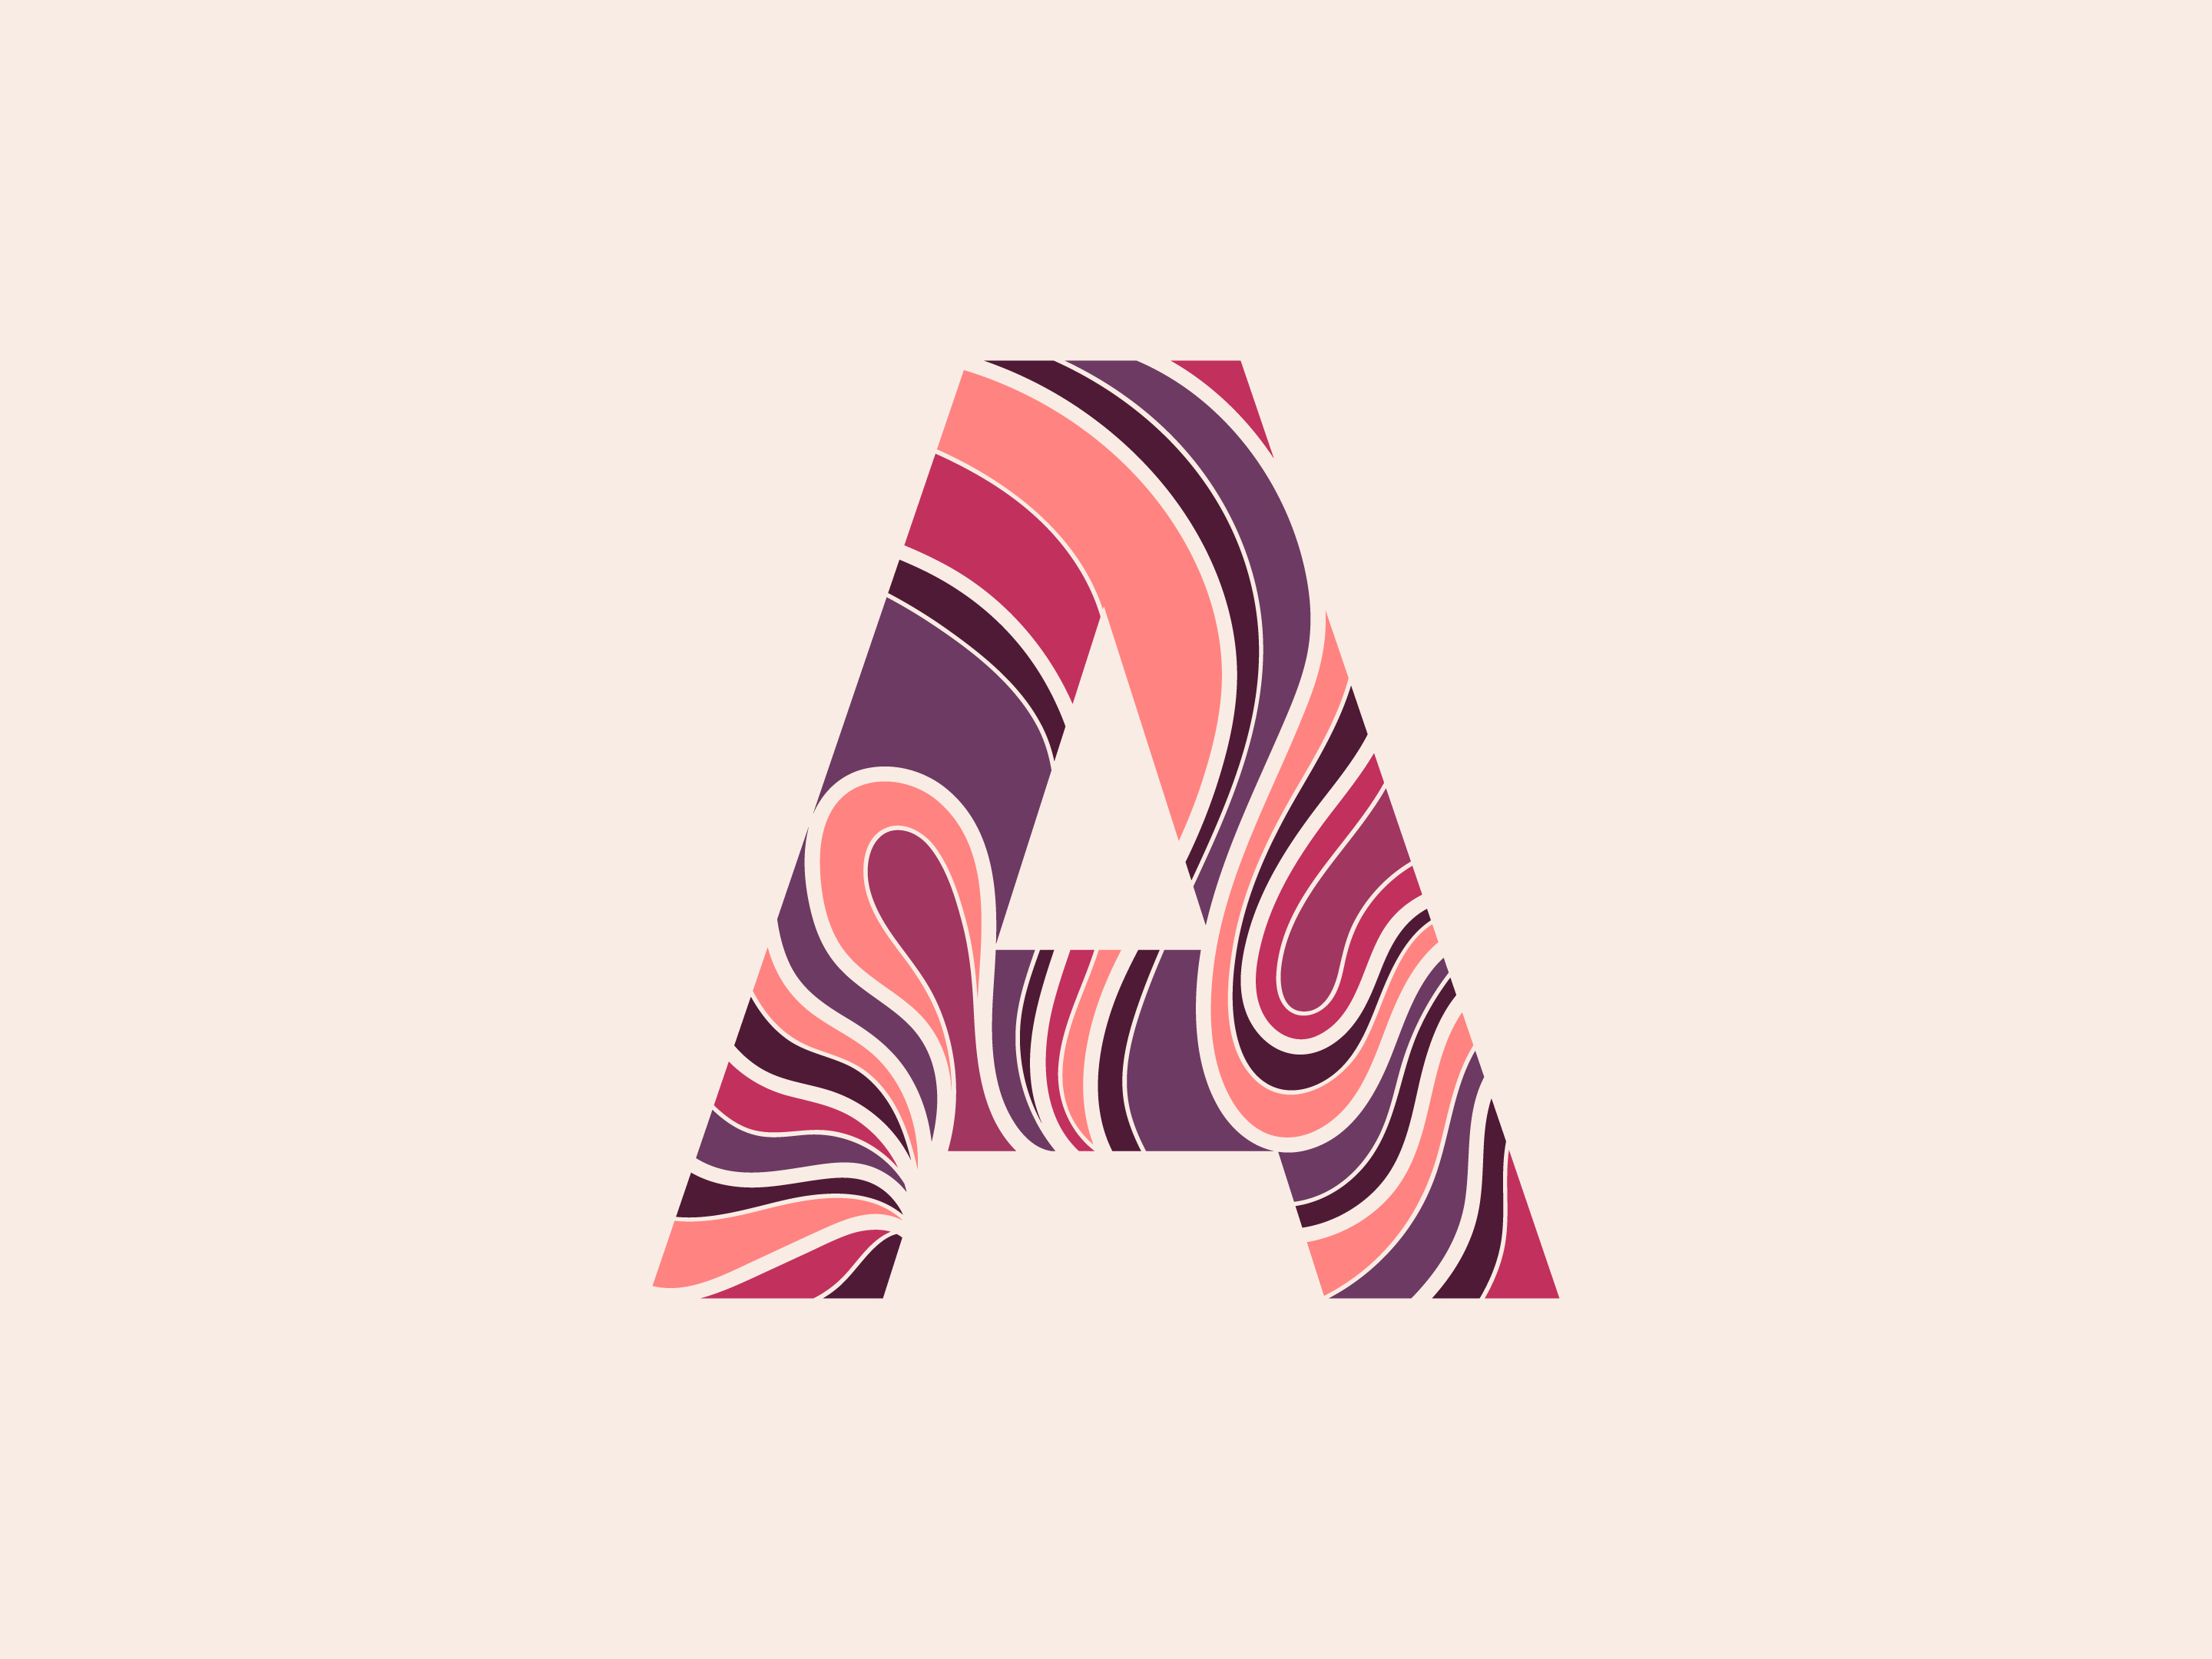 A - 36 Days of Type by Sam Bunny on Dribbble